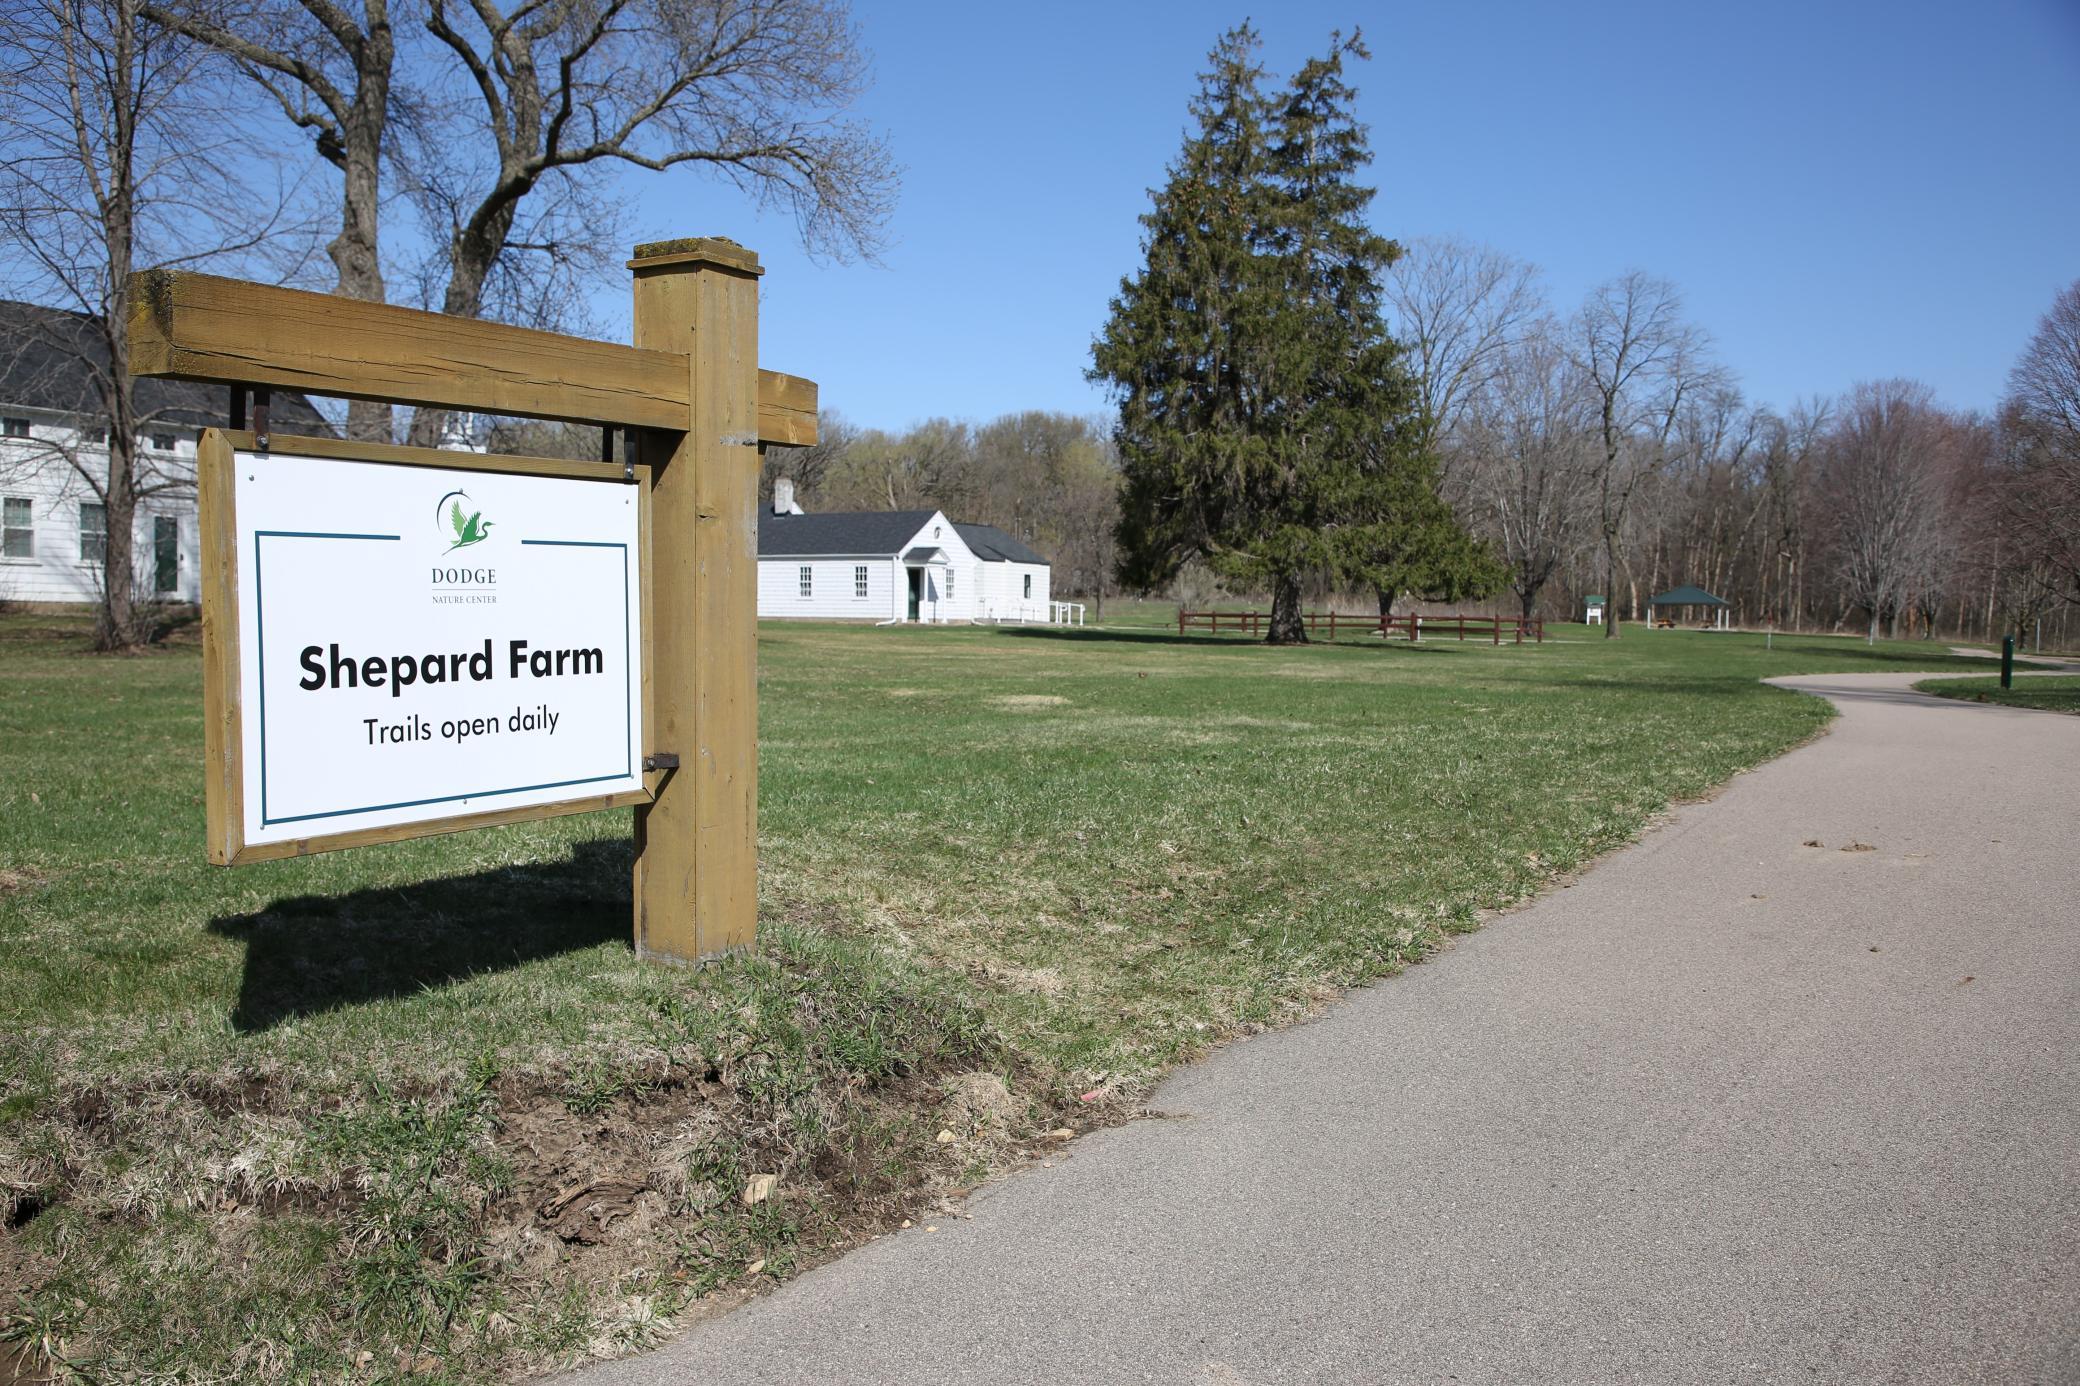 Dodge Nature Center at Shepard Farm is 1.5 miles away and offers wooded trails open to the public year-round.